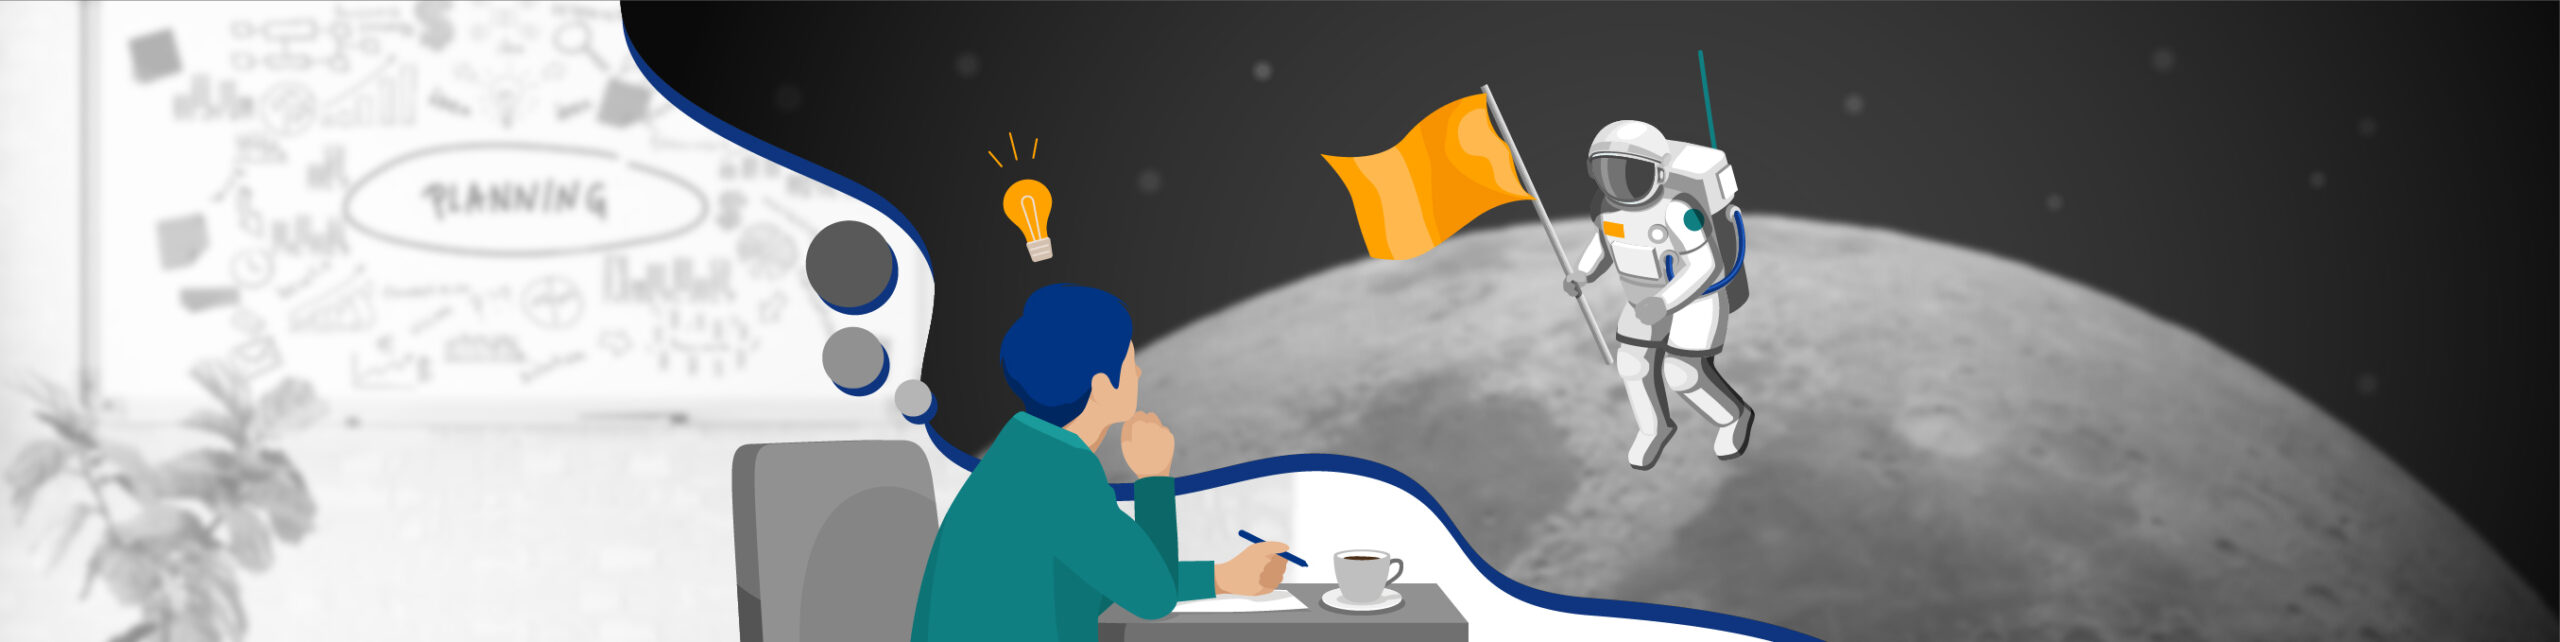 A person at a desk dreams about an astronaut touching down on the moon thanks to an innovative mindset for business process transformation